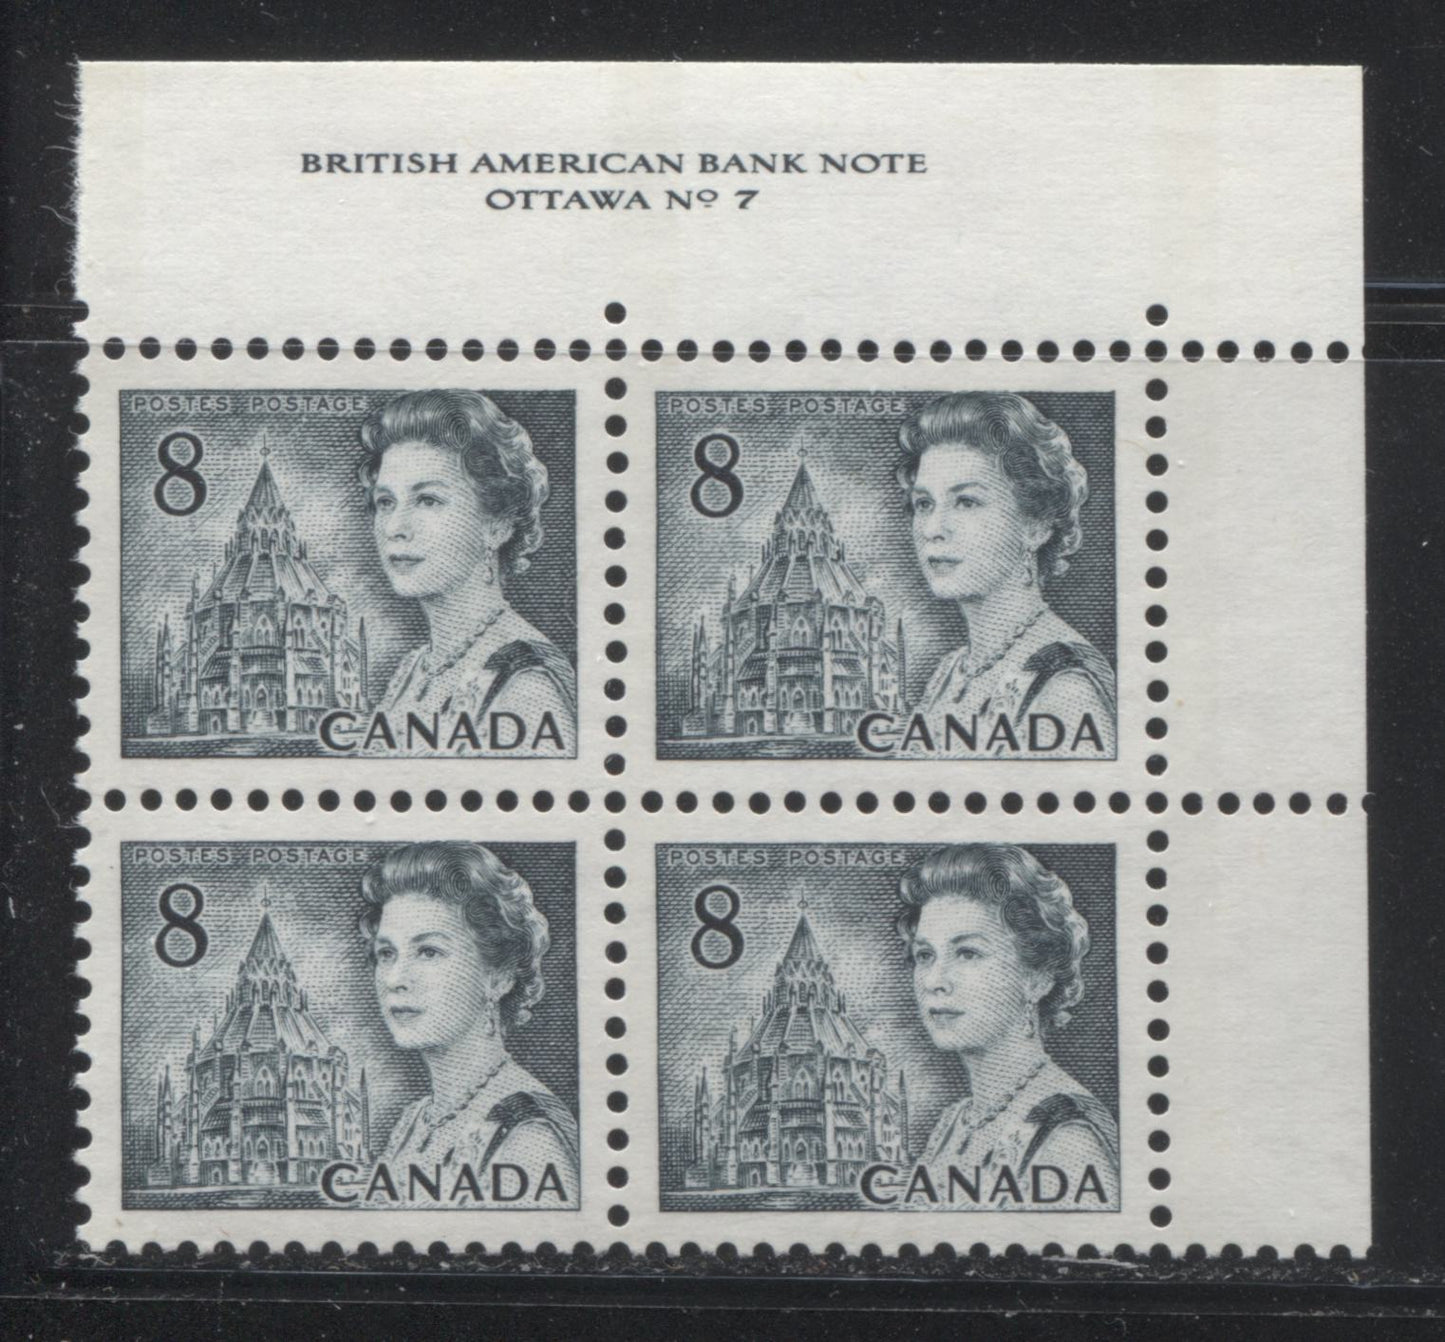 Lot 186 Canada #544piv 8c Slate Queen Elizabeth II, 1967-1973 Centennial Issue, An Unlisted VFNH UR T4 GT2 Tagged Plate 7 Block Of 4 On HF-fl Smooth Paper With PVA Gum, G2aL Tagging Error